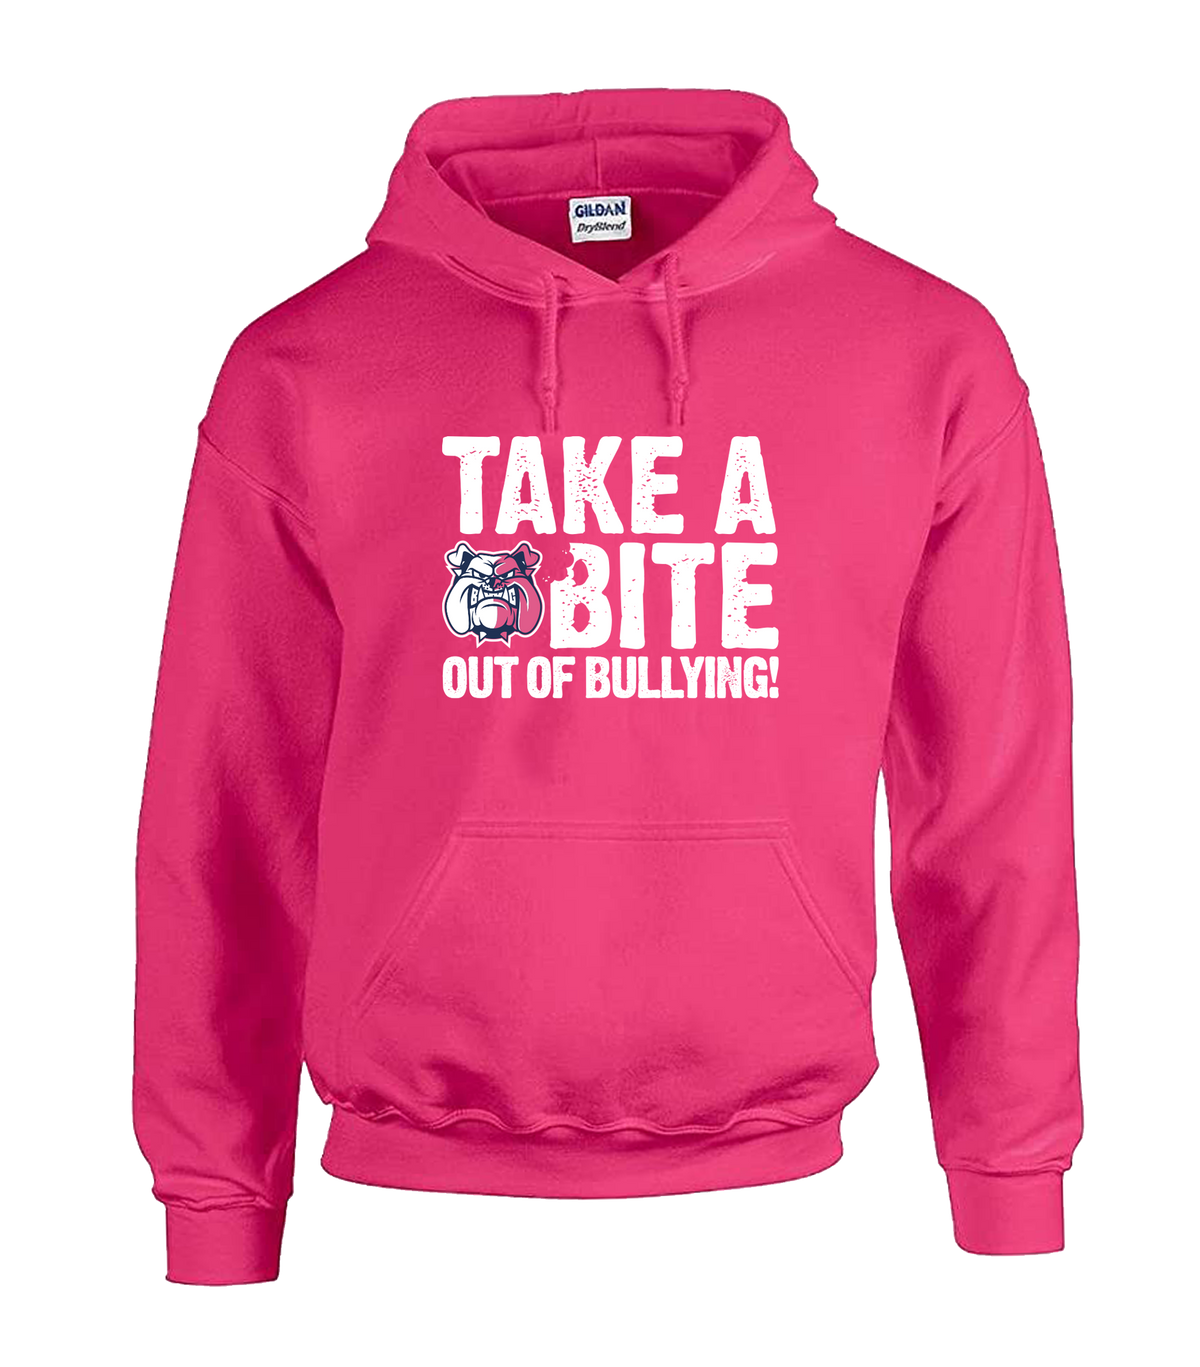 Take A Bite Out Of Bullying! Pink Hoodie